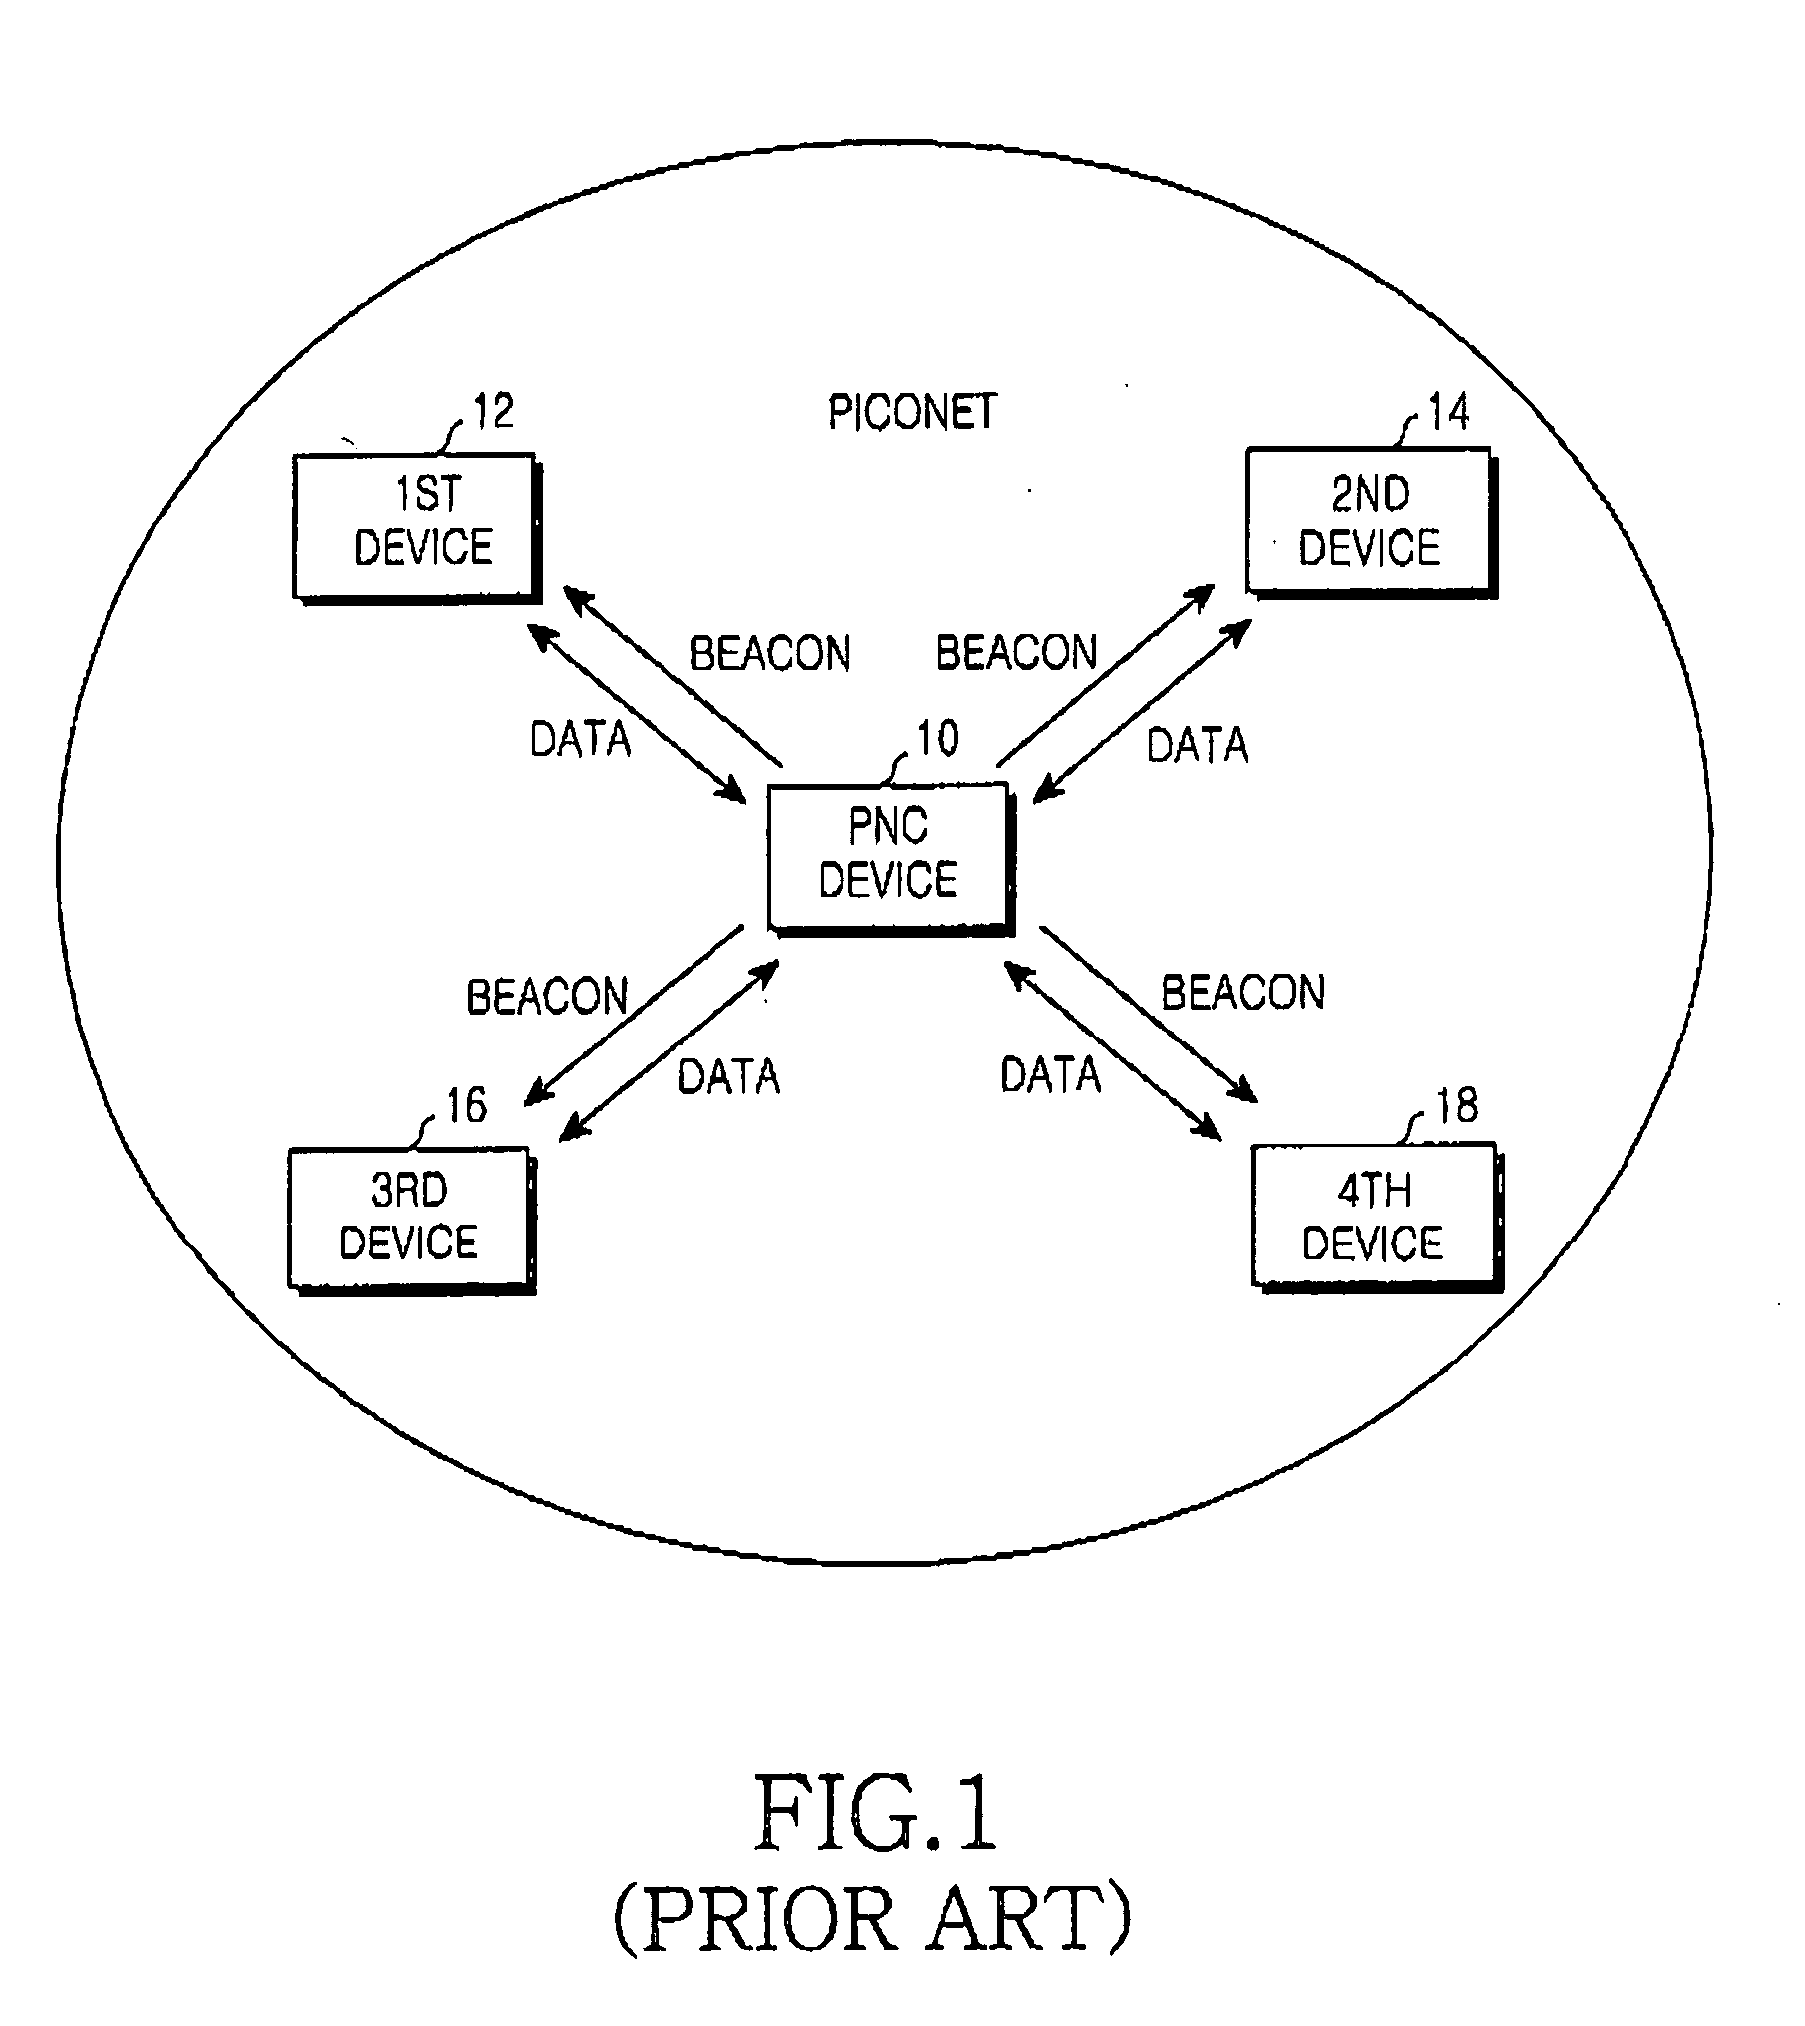 High-speed - WPAN and method for enabling communication between devices located in different piconets